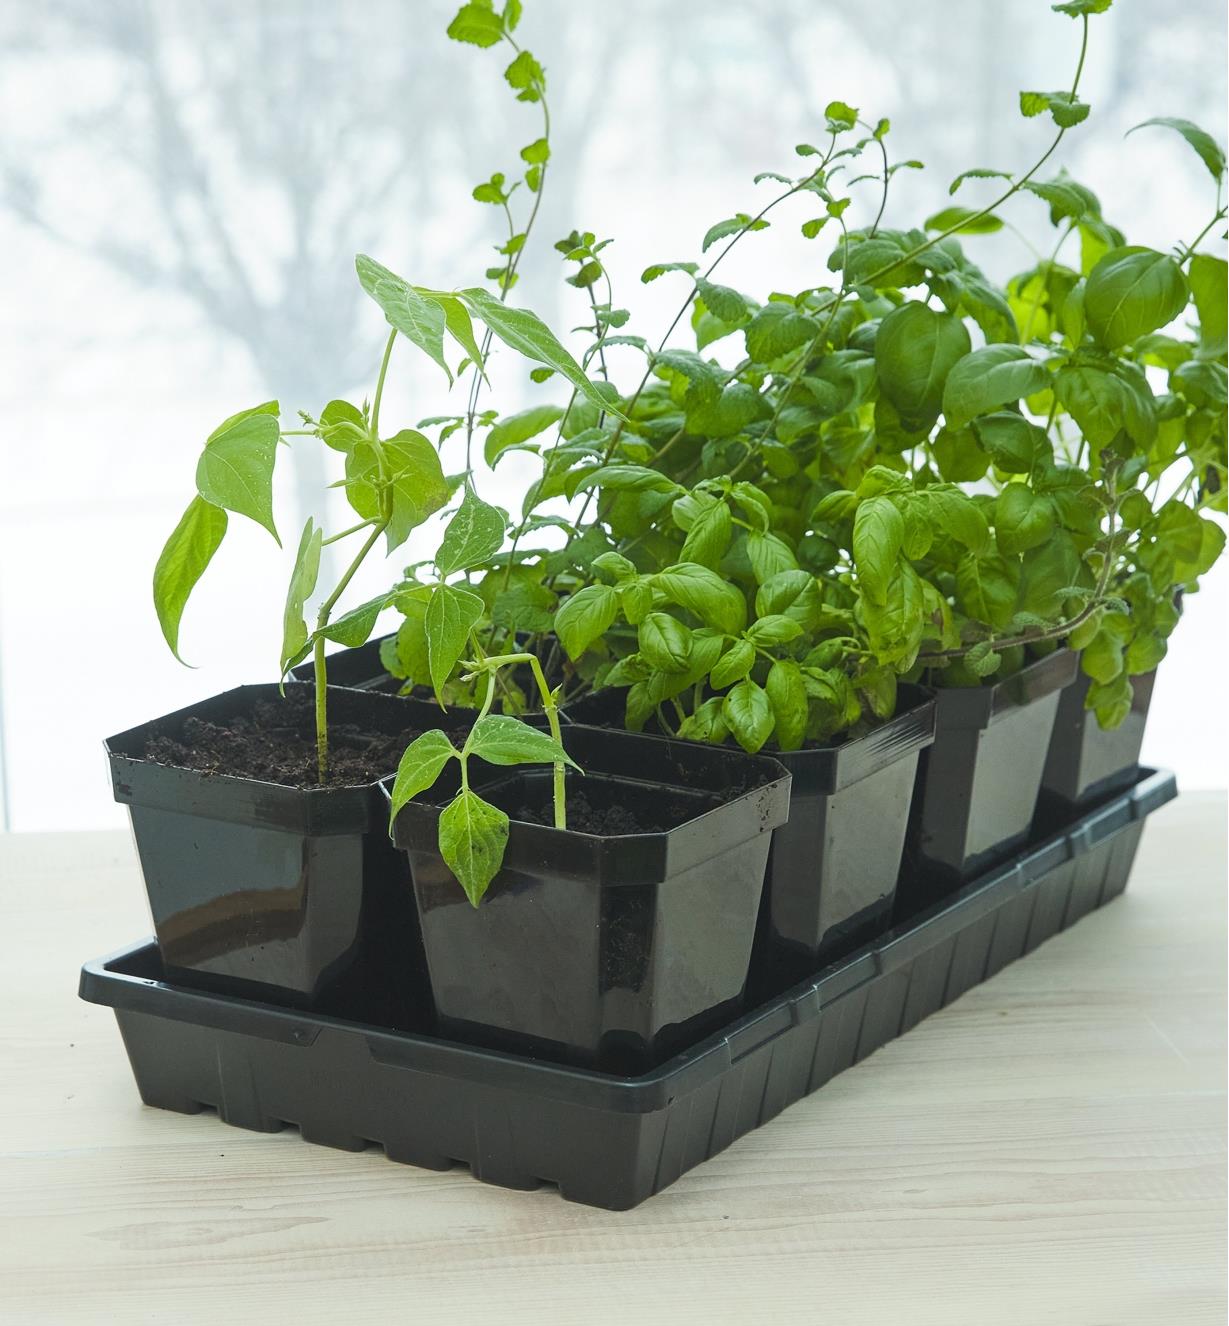 Black pots with growing plants resting in a propagation tray